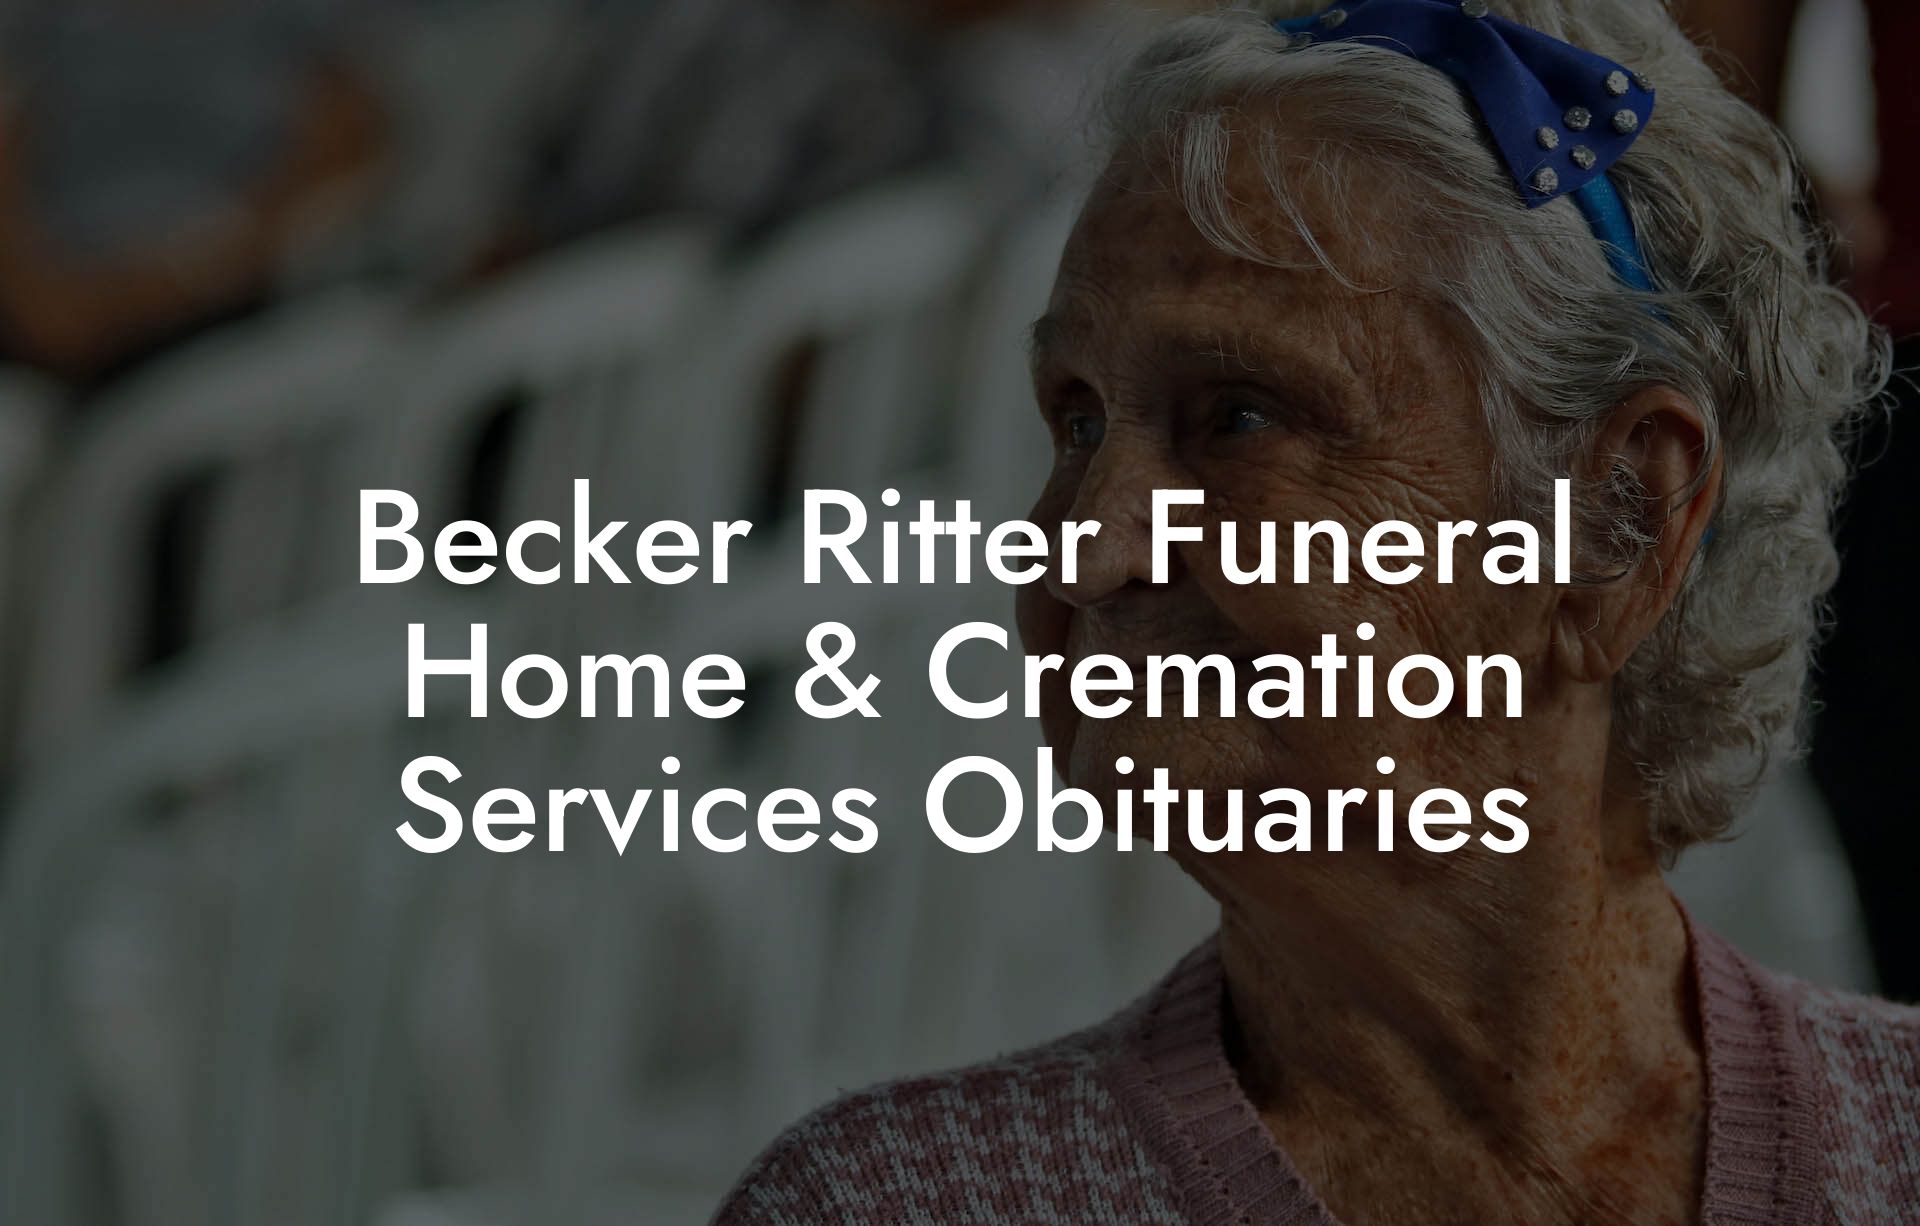 Becker Ritter Funeral Home & Cremation Services Obituaries